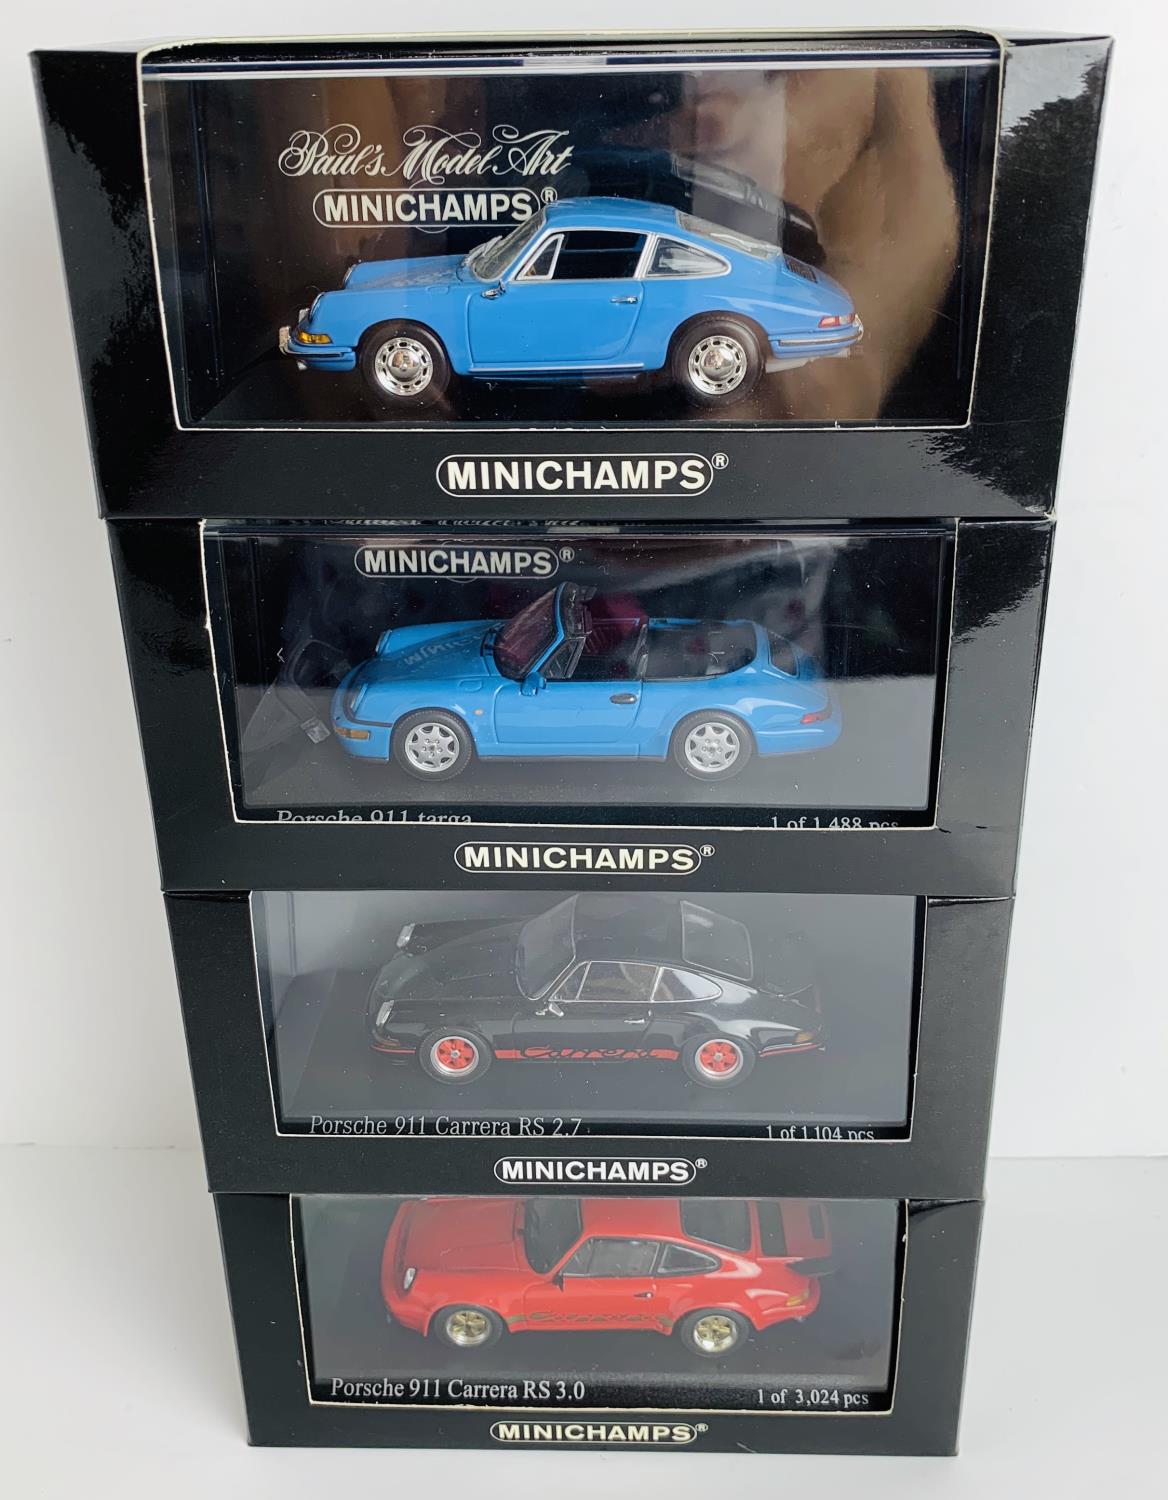 4x Minichamps 1:43 Scale Porsche 911 Models - All Boxed. P&P Group 3 (£25+VAT for the first lot